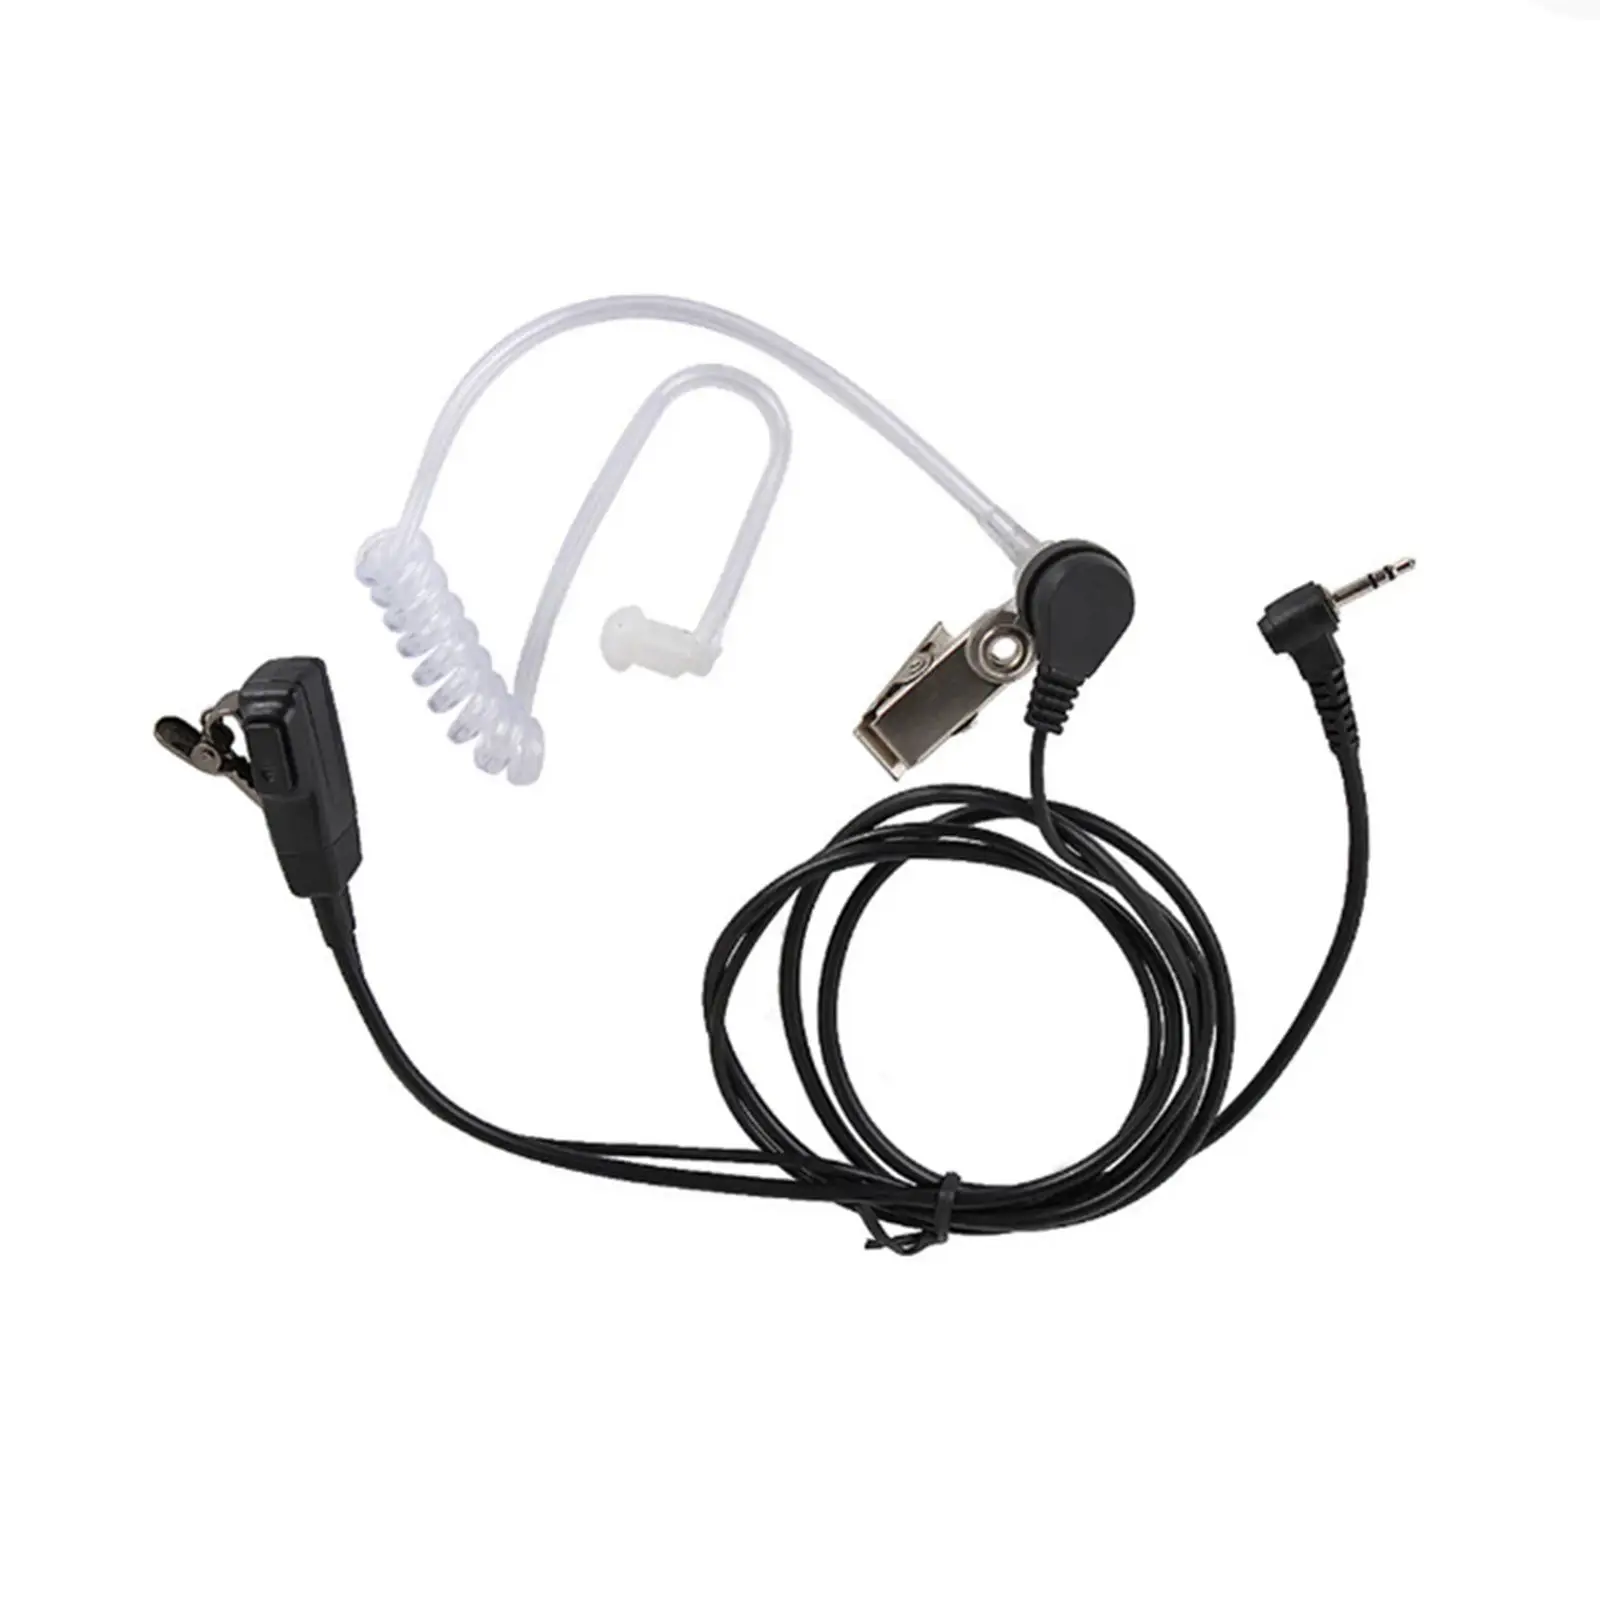 Walkie Talkie 2.5mm Earpiece 1 Pin Covert Acoustic Tube Earpieces Headset with PTT Mic Compatible with Motorola Talkabout MH230R